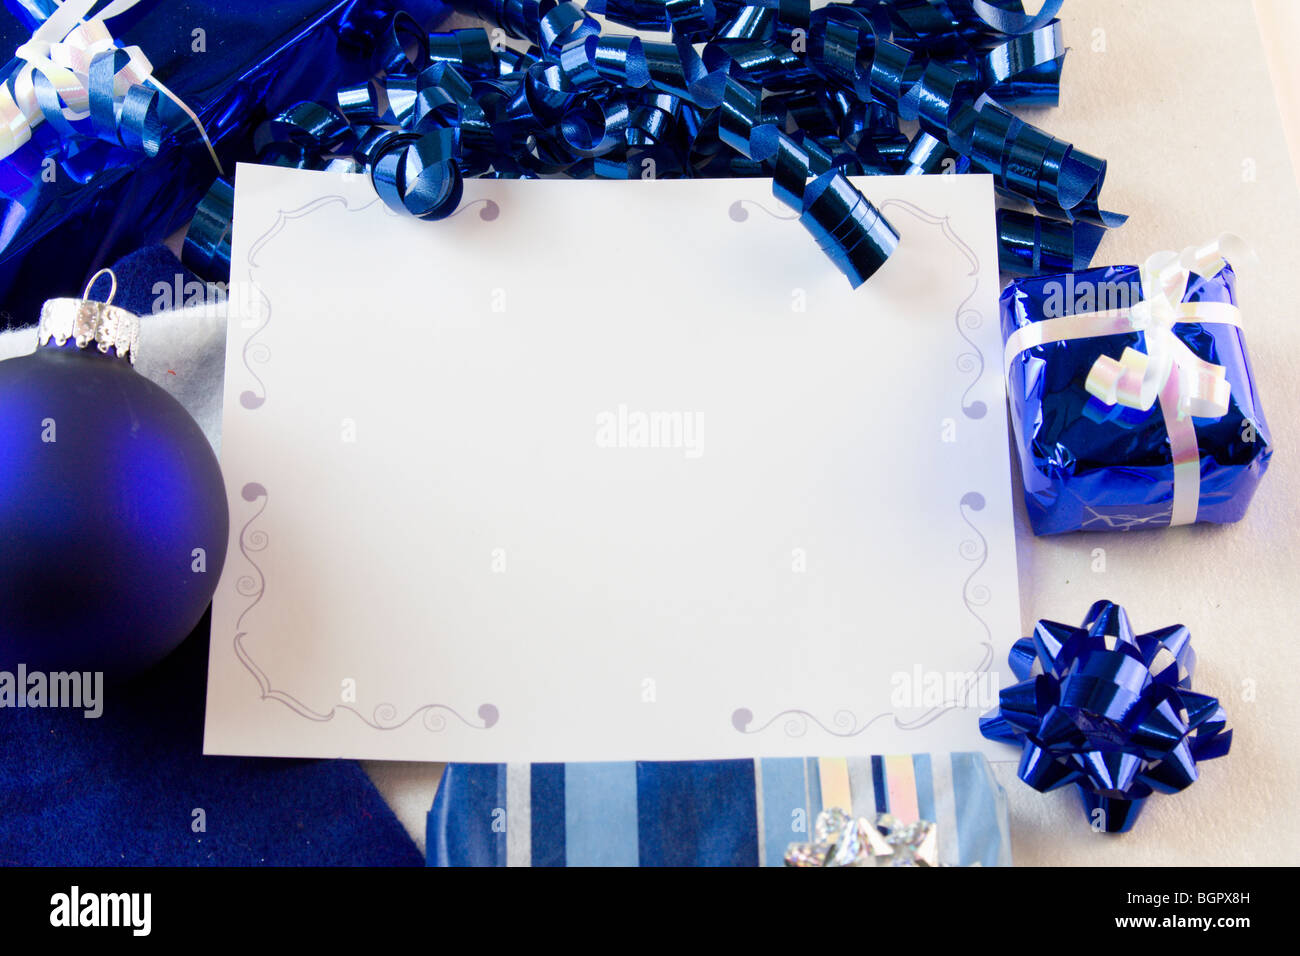 blank Christmas card with blue bauble, presents, bow, ribbon and copyspace Stock Photo